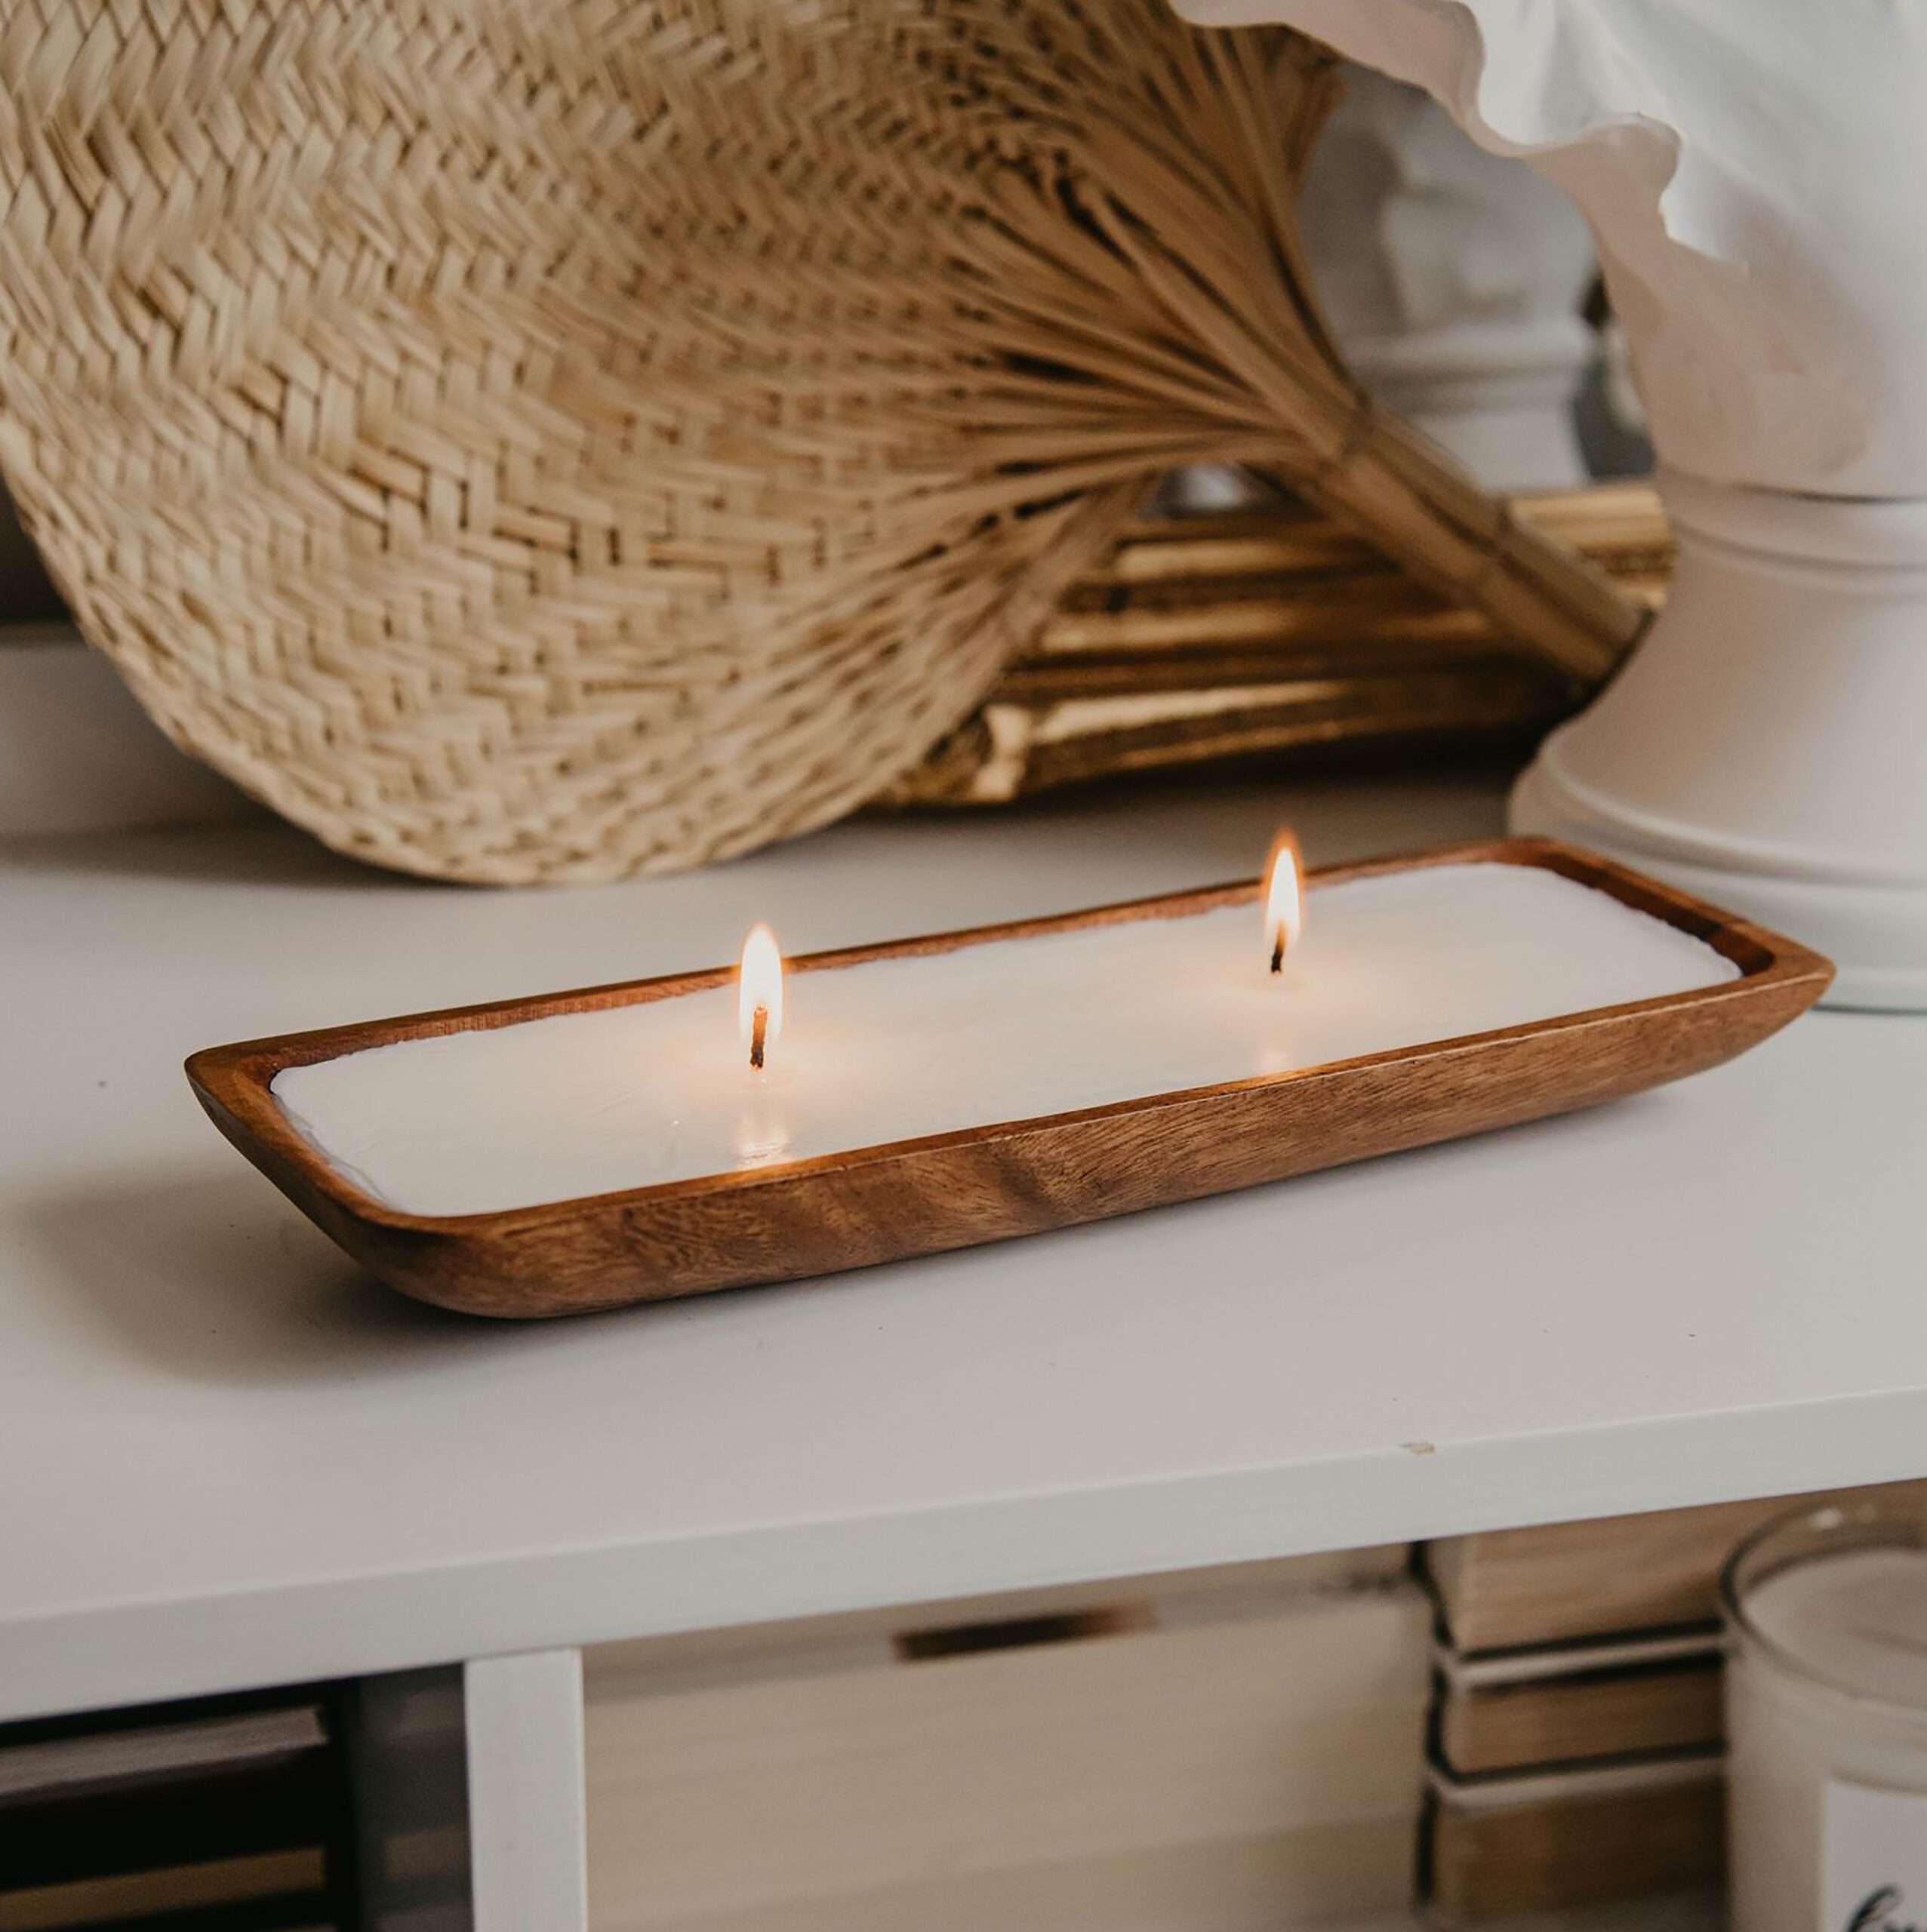 MWC-18 Wooden Dough Bowl Candle 12 inch | Handcrafted Premium Dough Candle Bowl for Home Decor